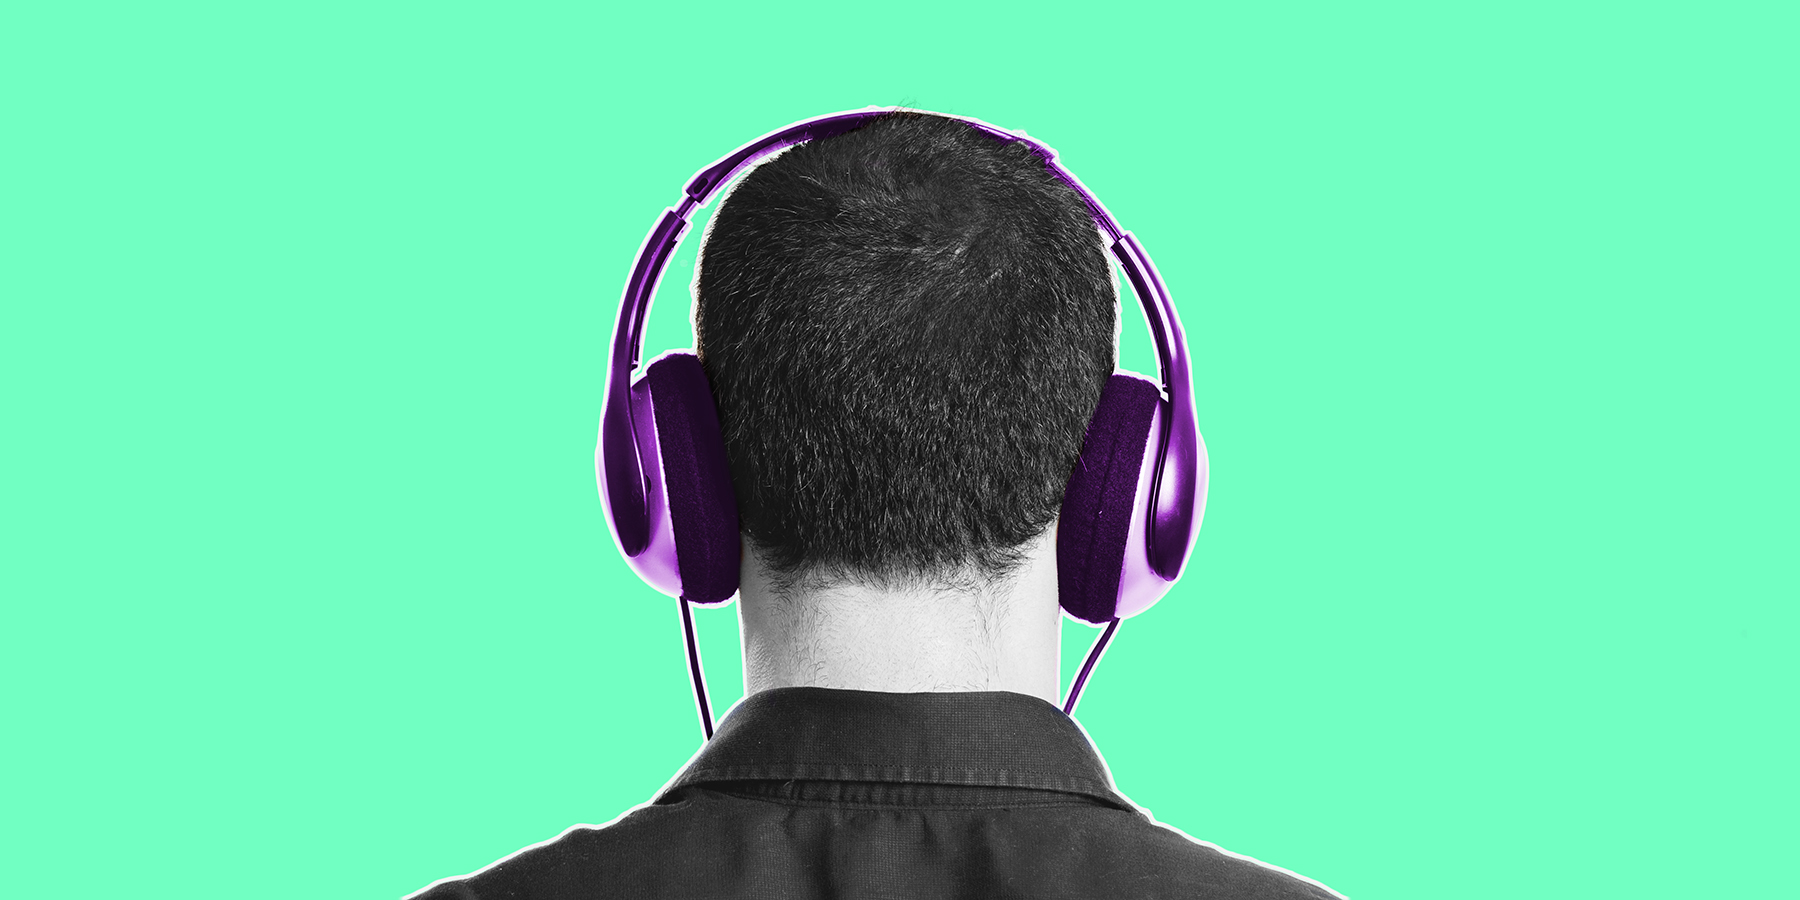 6 Podcasts Every Freelancer Should Listen To